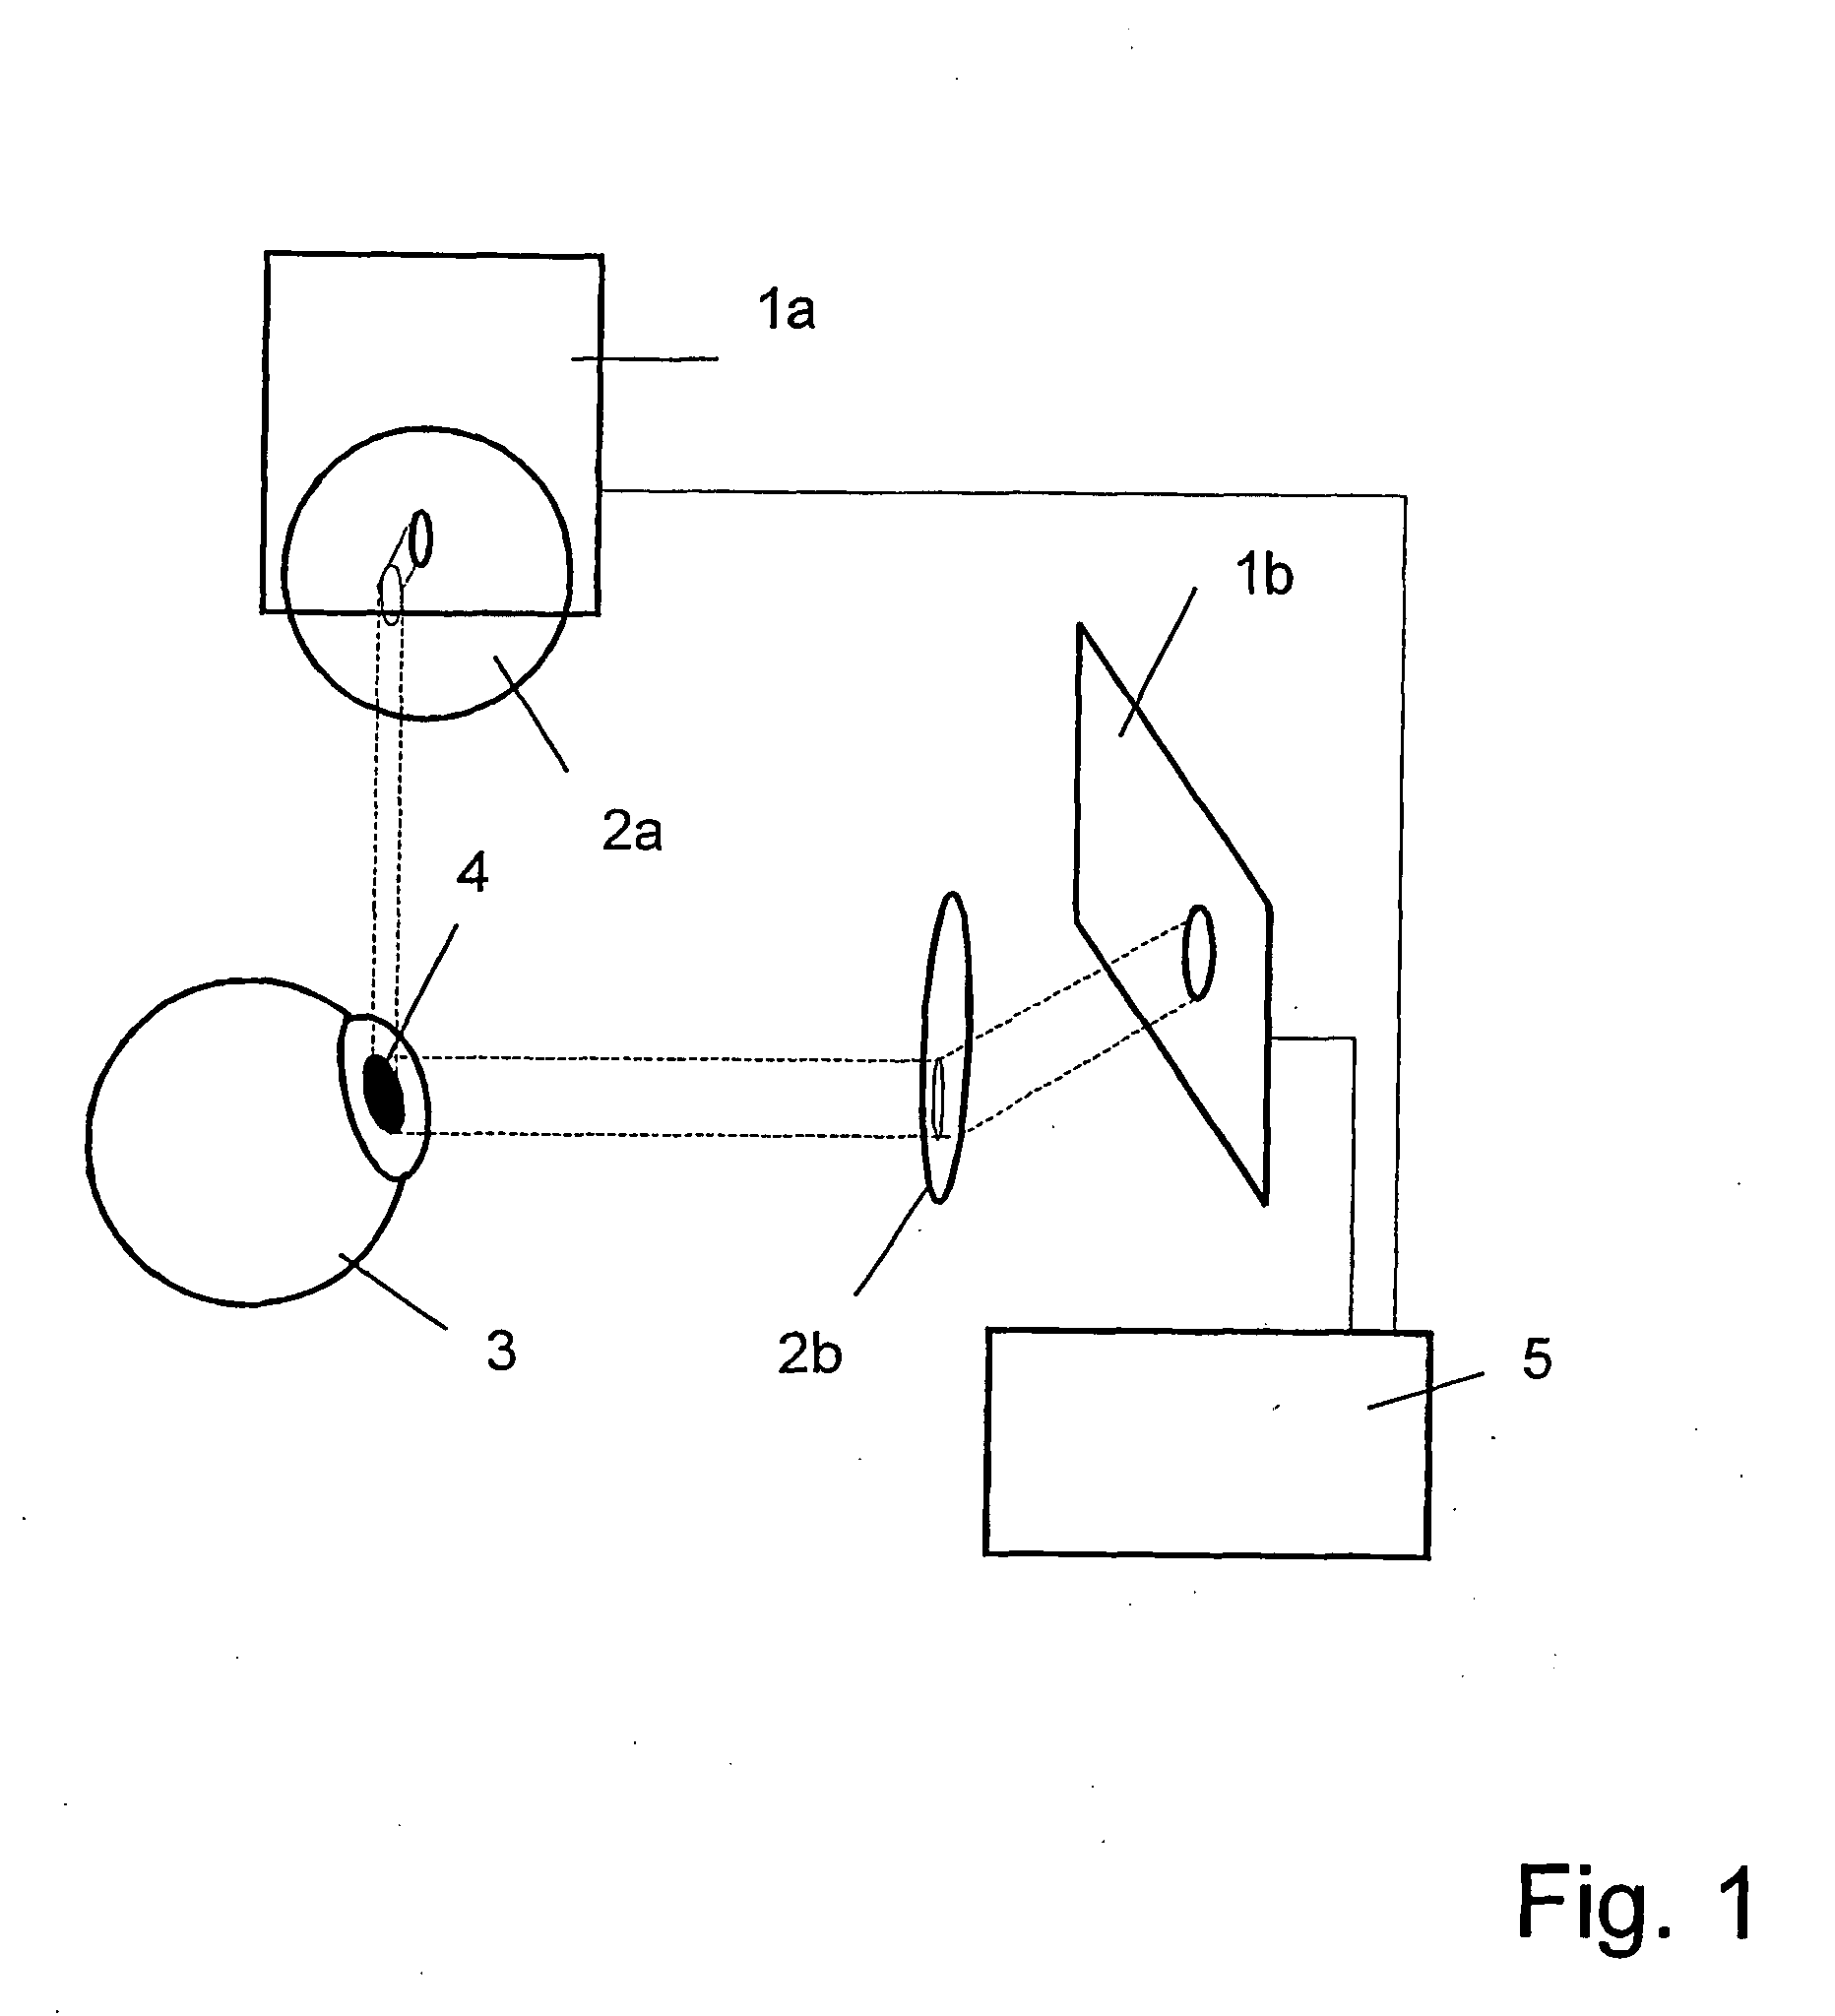 Device and Method for the Contactless Determination of the Direction of Viewing